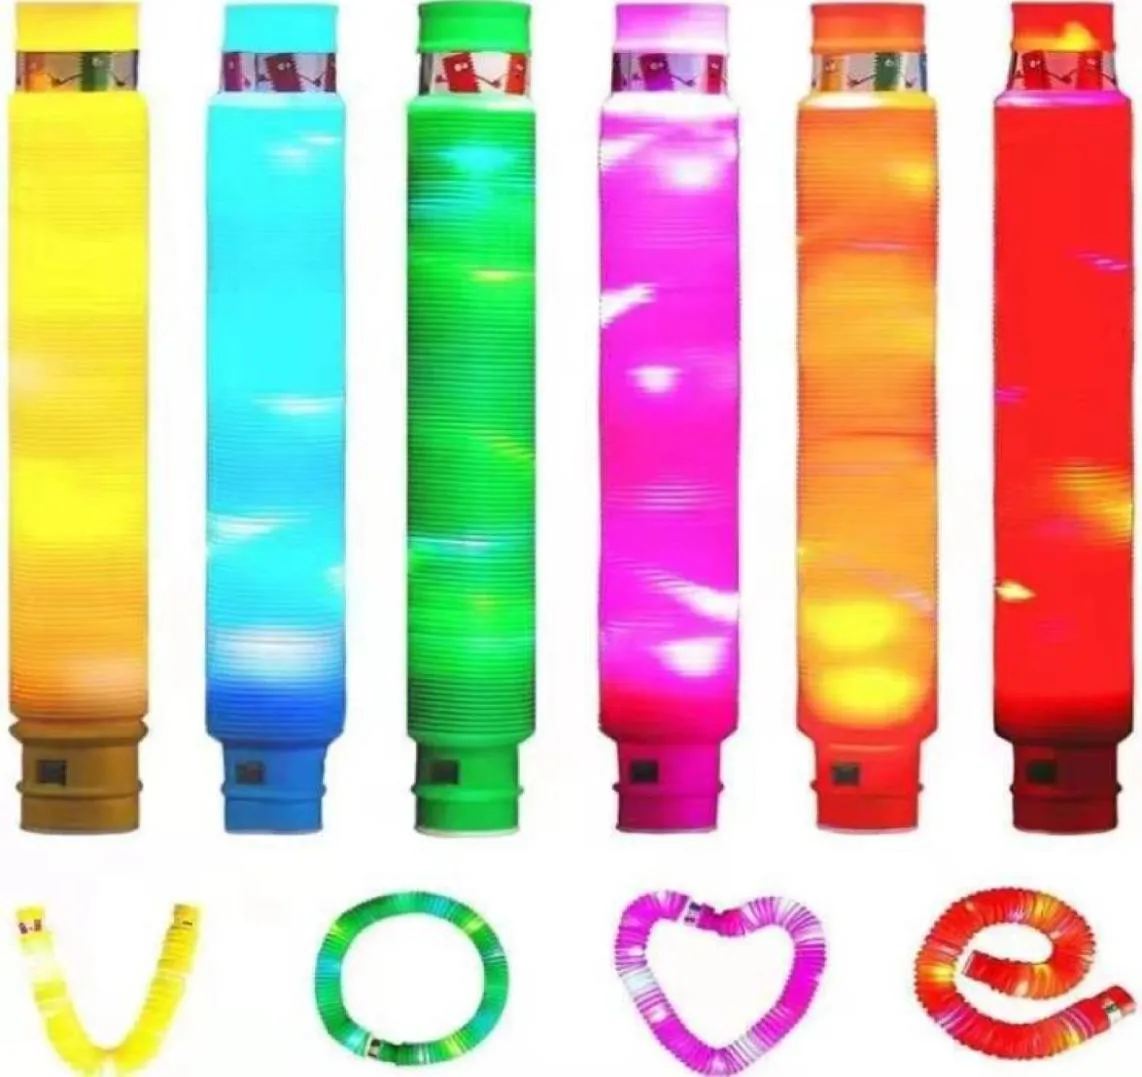 Led Rave Toy Flash Light Up Pop Tubes Kids Adults Fidget Pipes Glow Sensory Learning Props Birthday Party DIY Decorations2955556